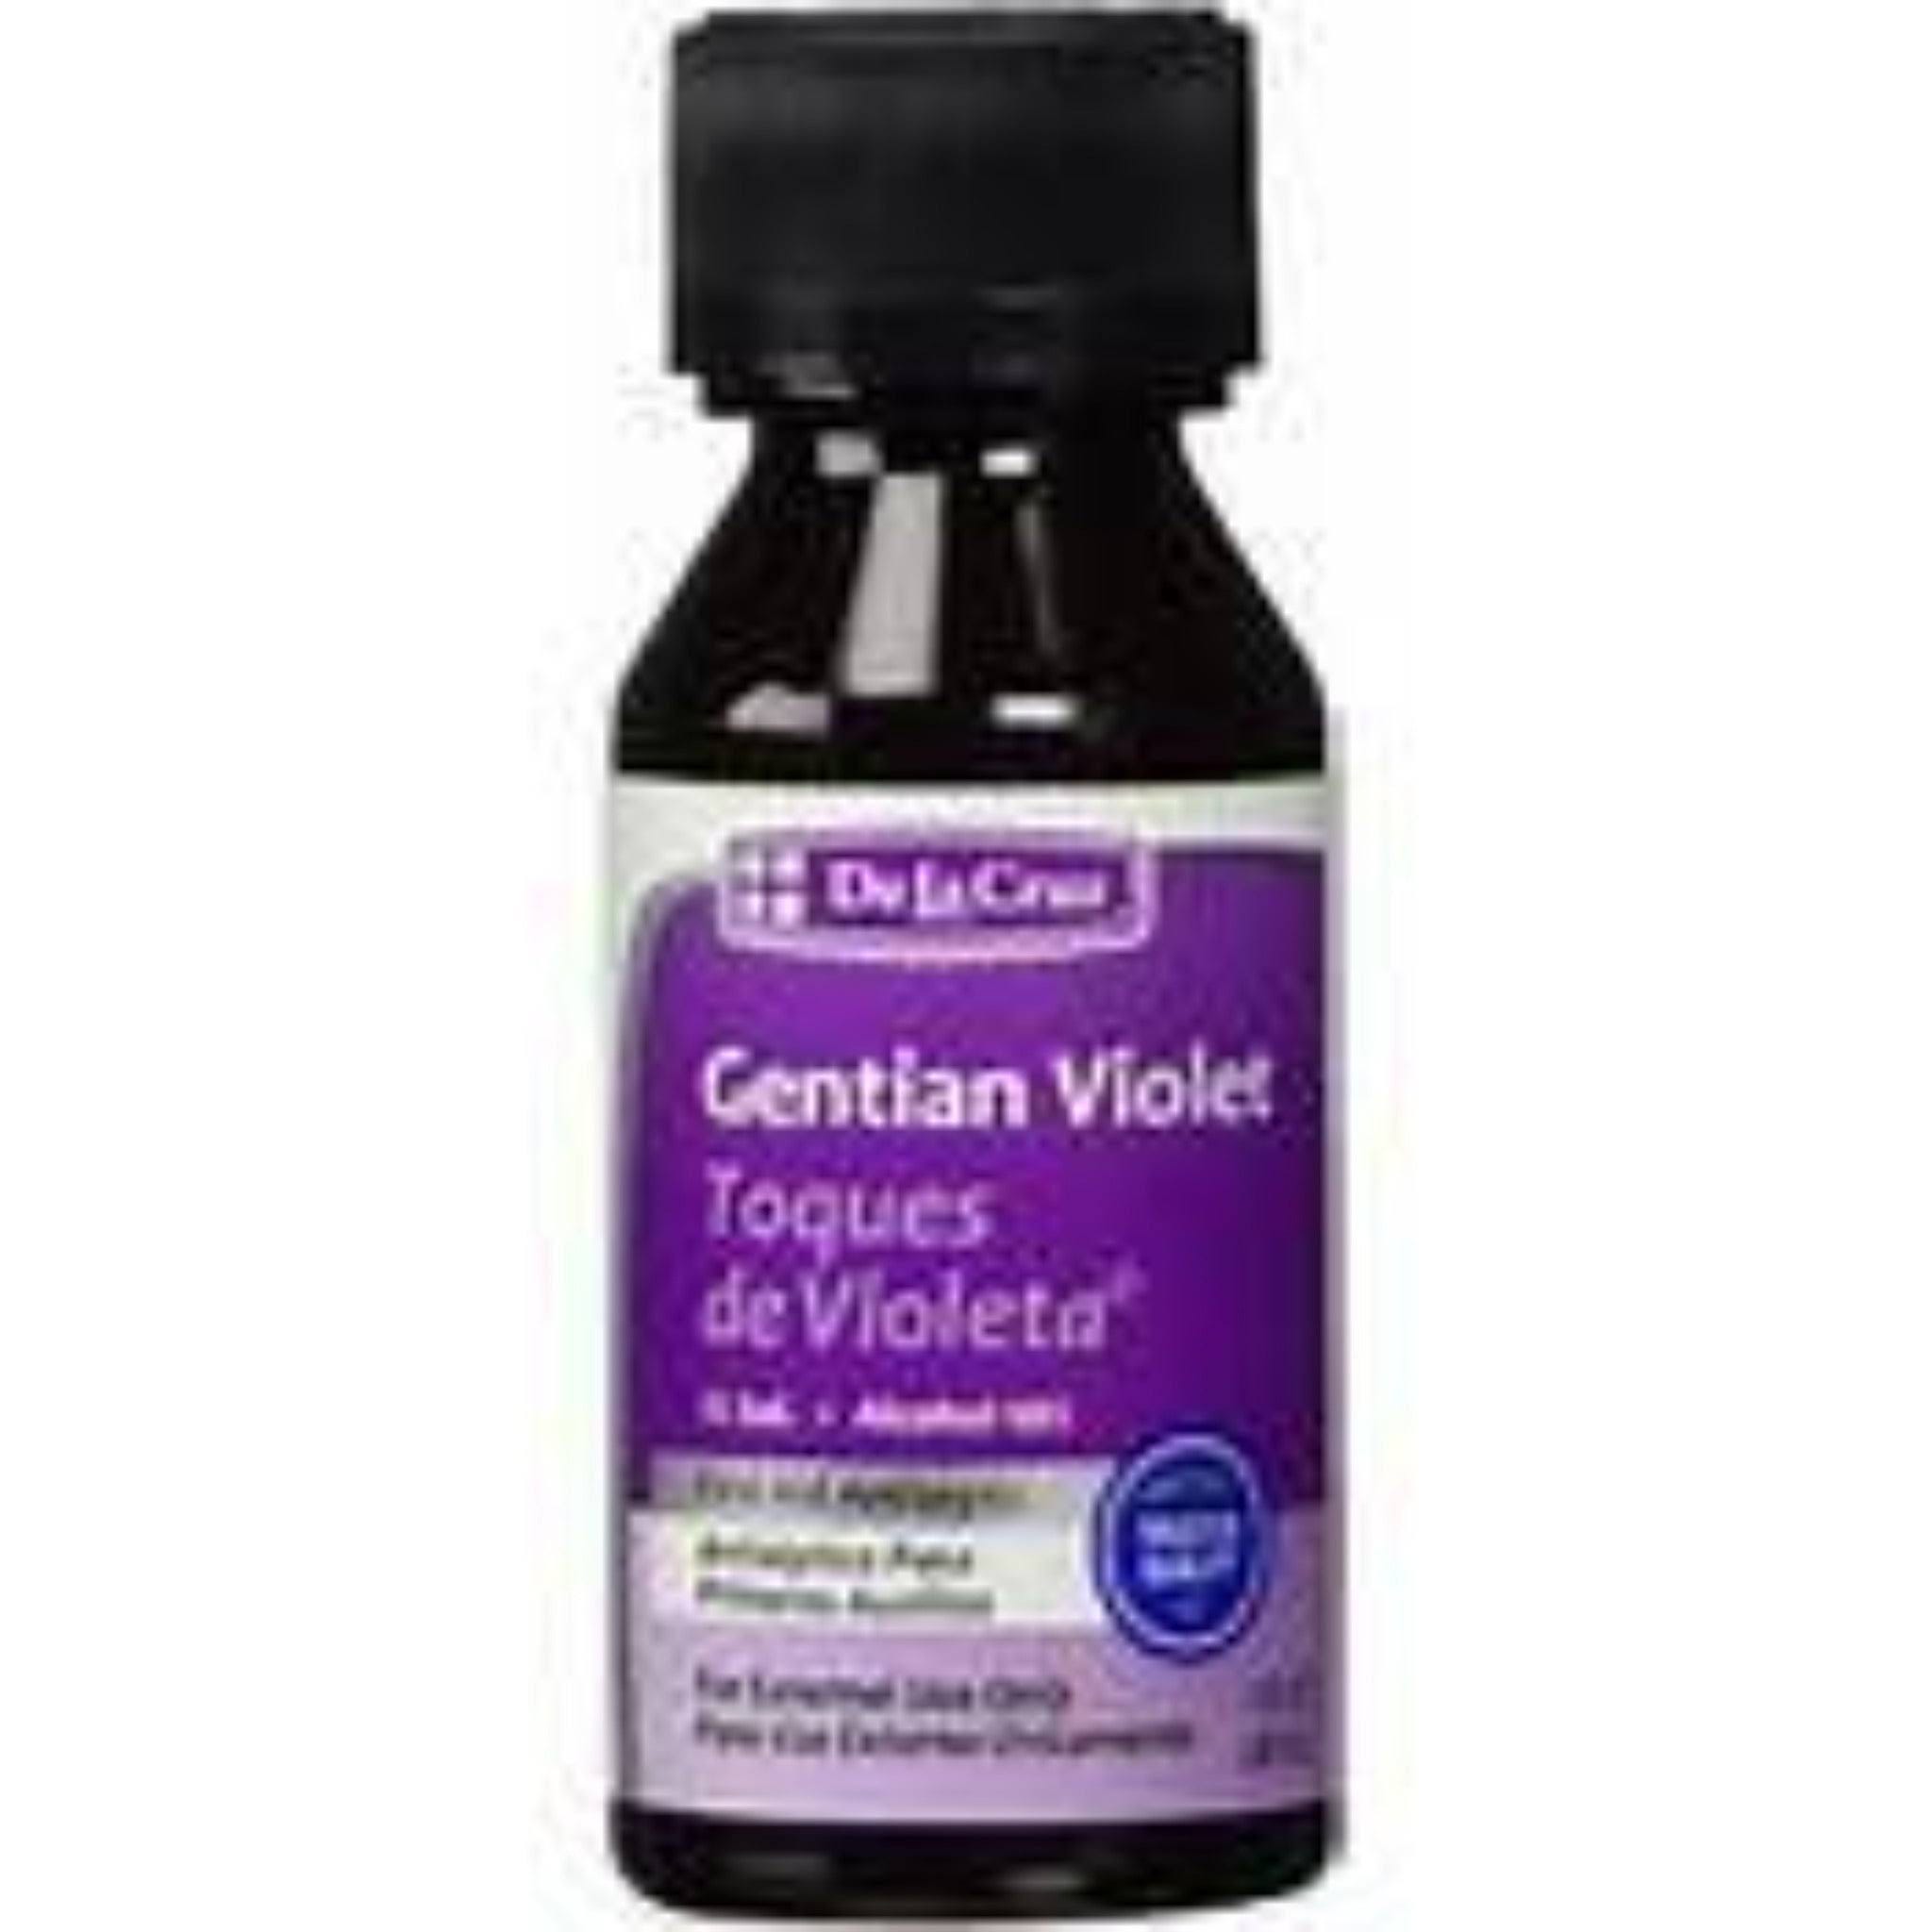 Gentian Violet Wound Cleanser: Effective Antiseptic for Sores and Cuts | Image